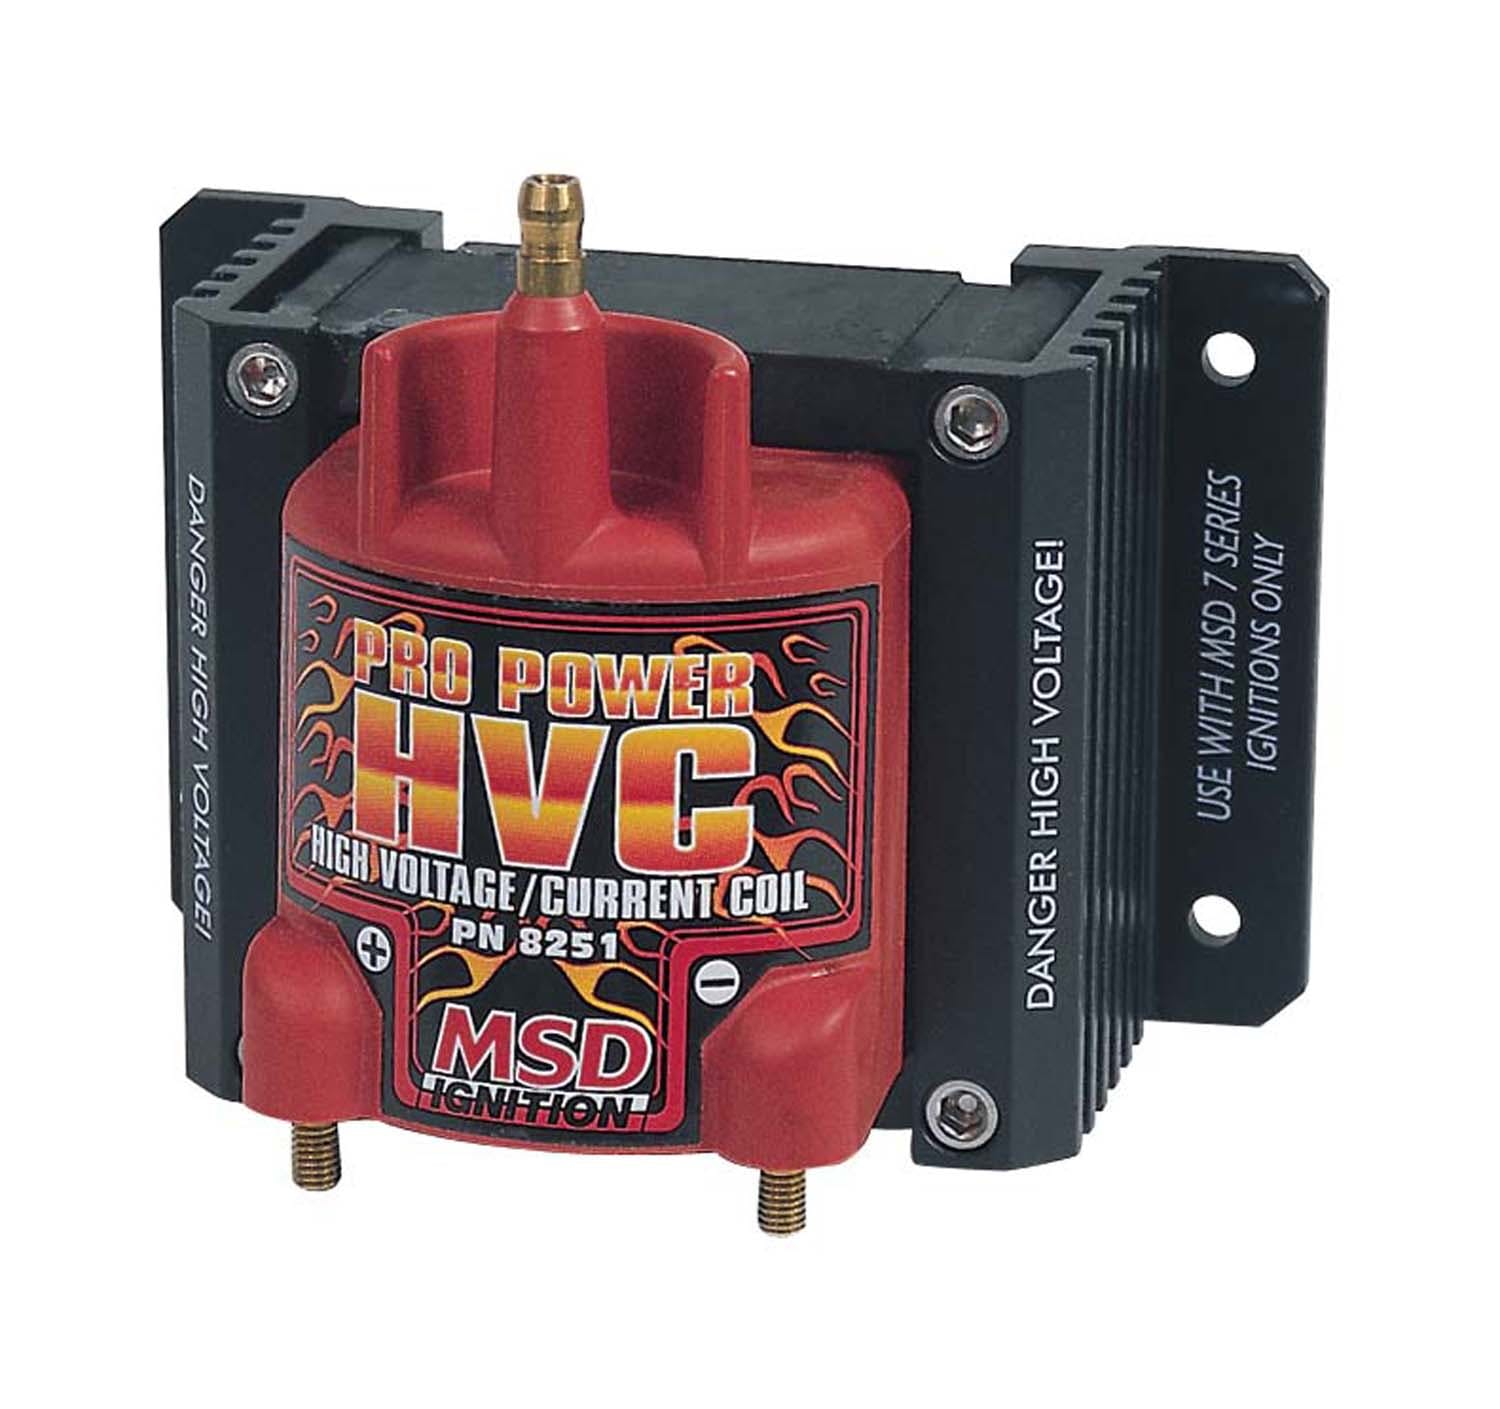 MSD Performance 8251 Pro Power HVC Coil, Use w/ MSD 7 Series